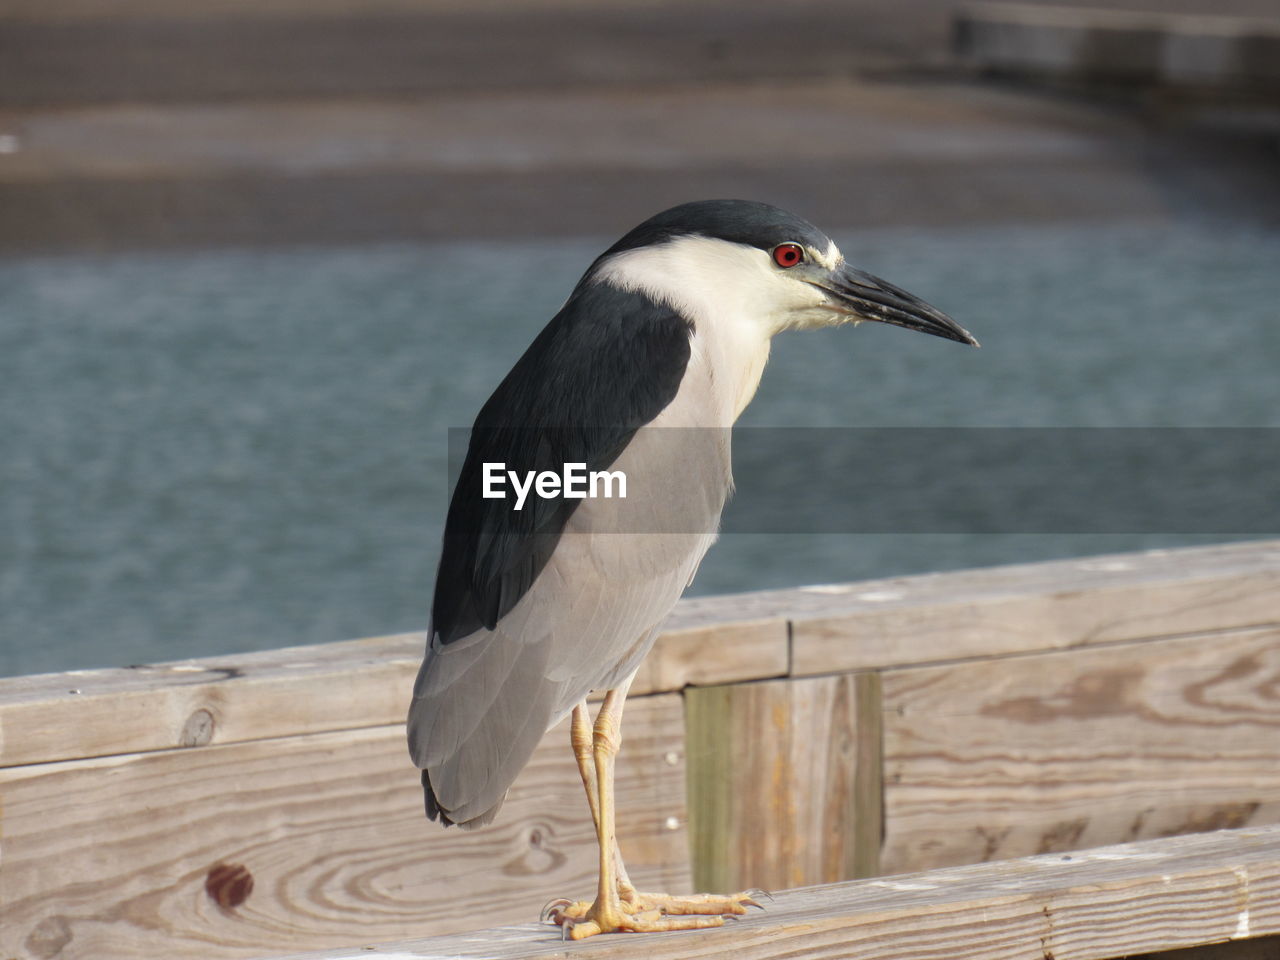 Black crowned night heron perching on wooden railing against river